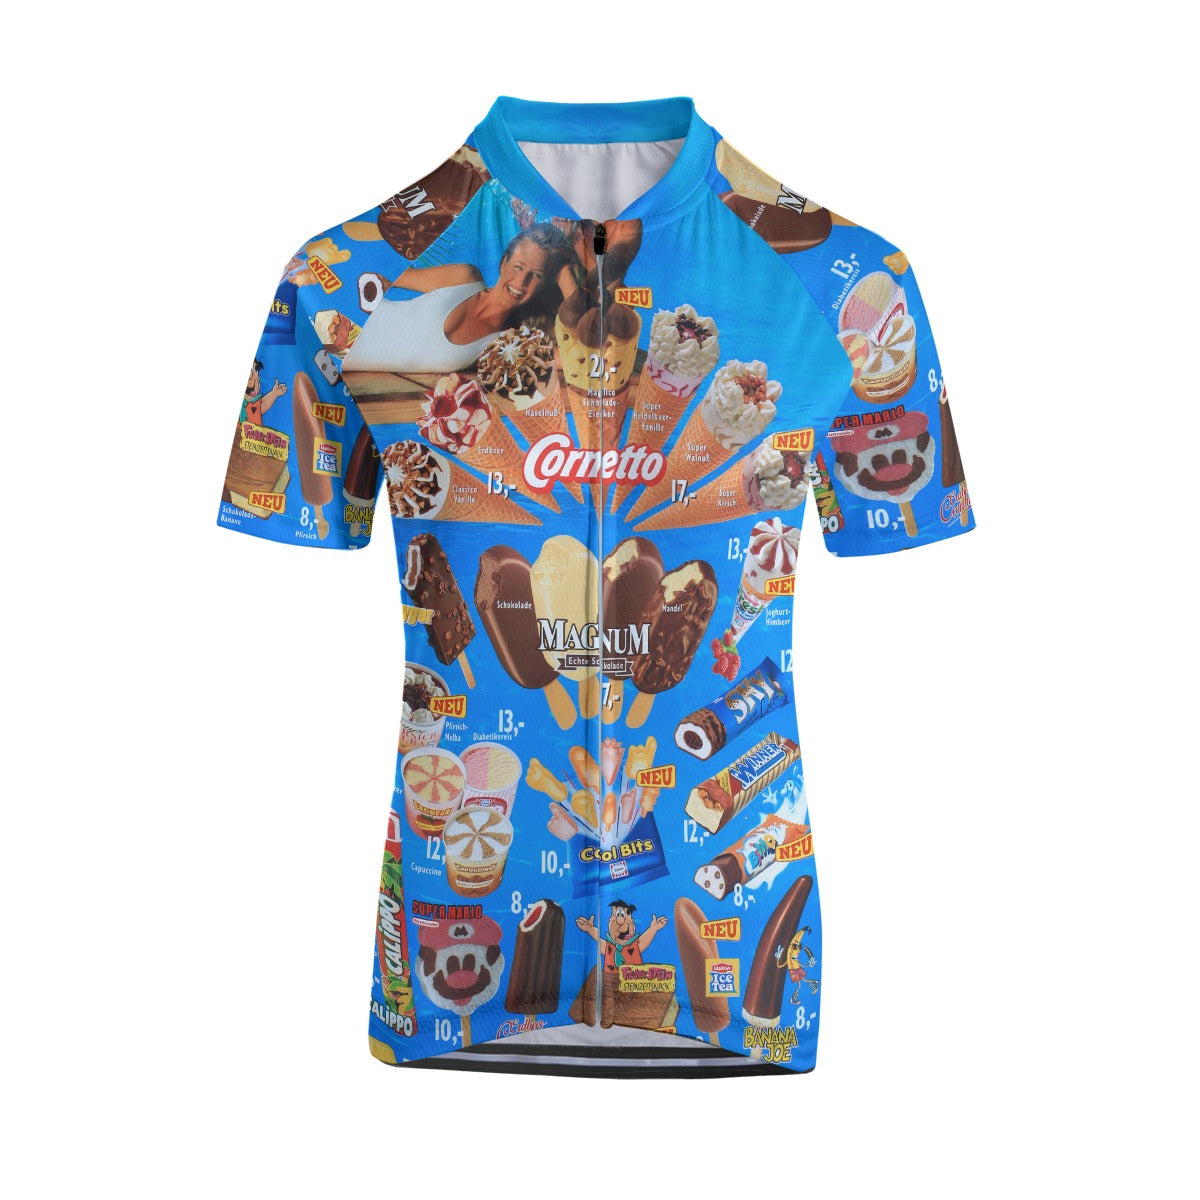 Women’s cycling jersey with vibrant ice cream design inspired by Hawaii.